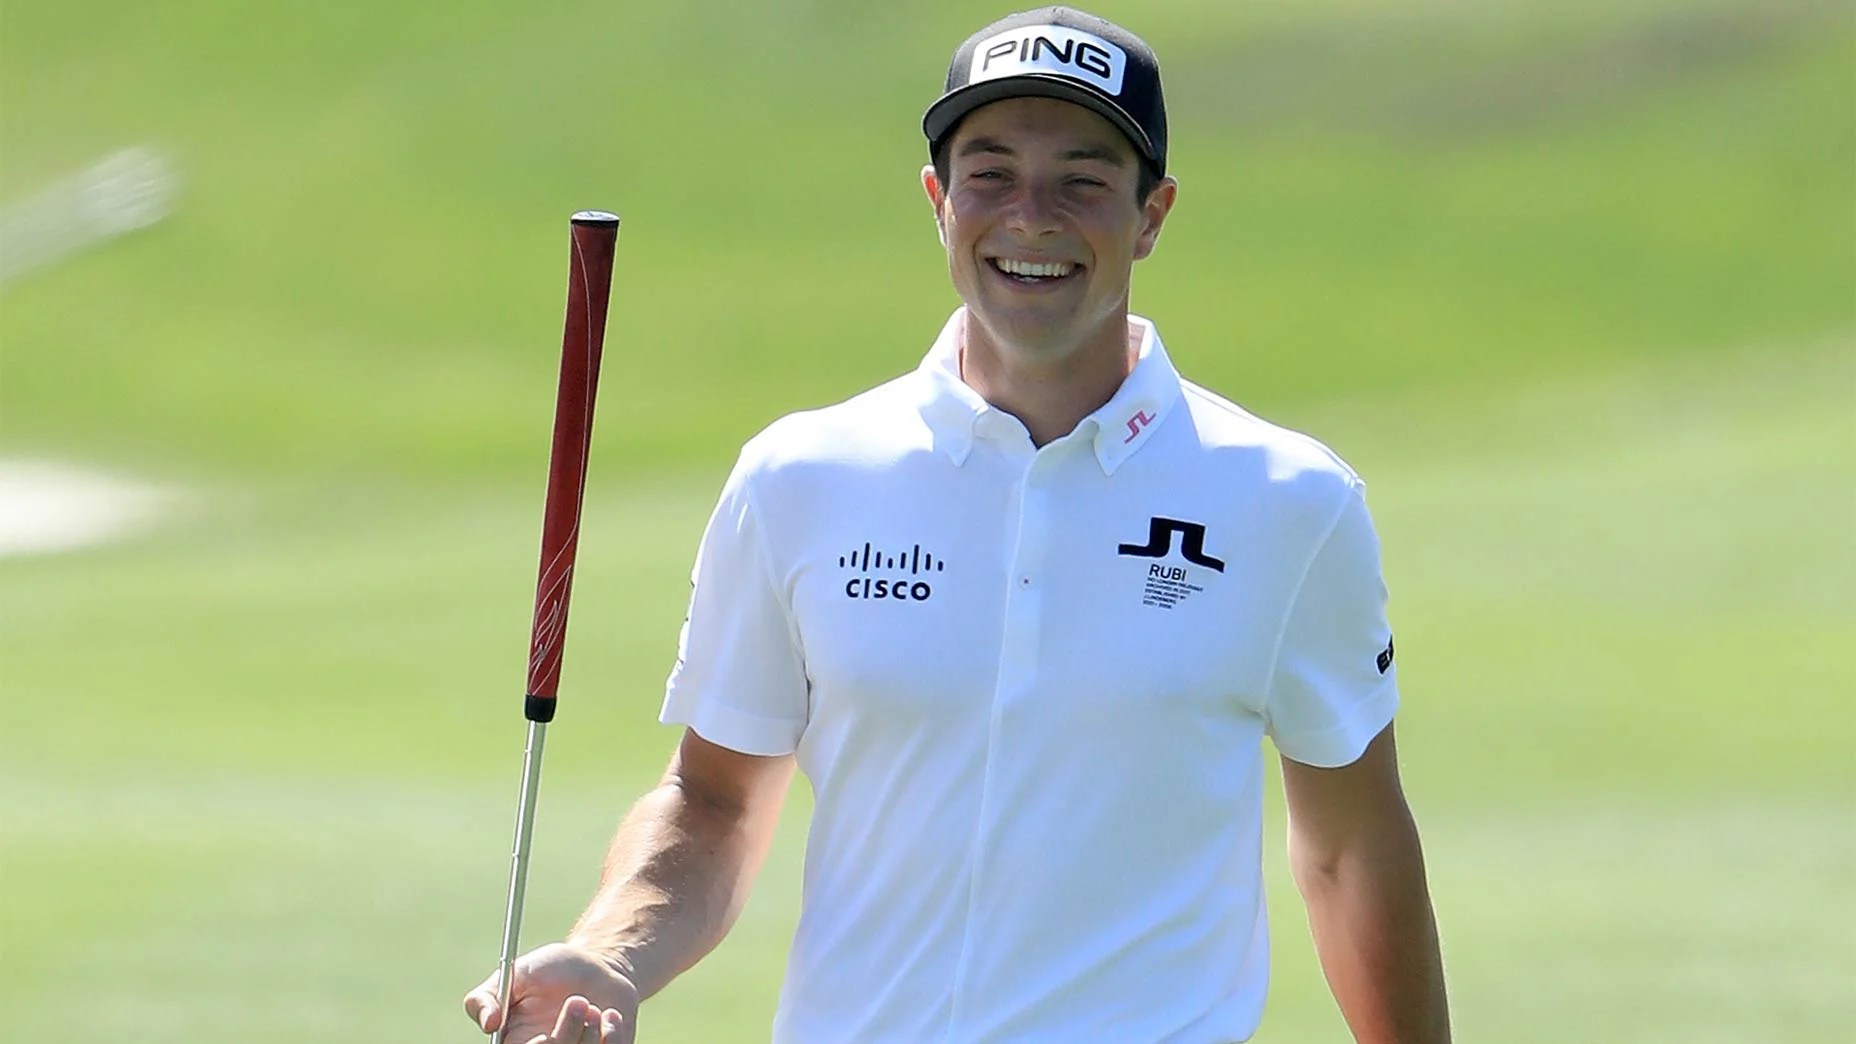 Viktor Hovland driving to every Tour stop (and drinking LOTS of Red Bull)